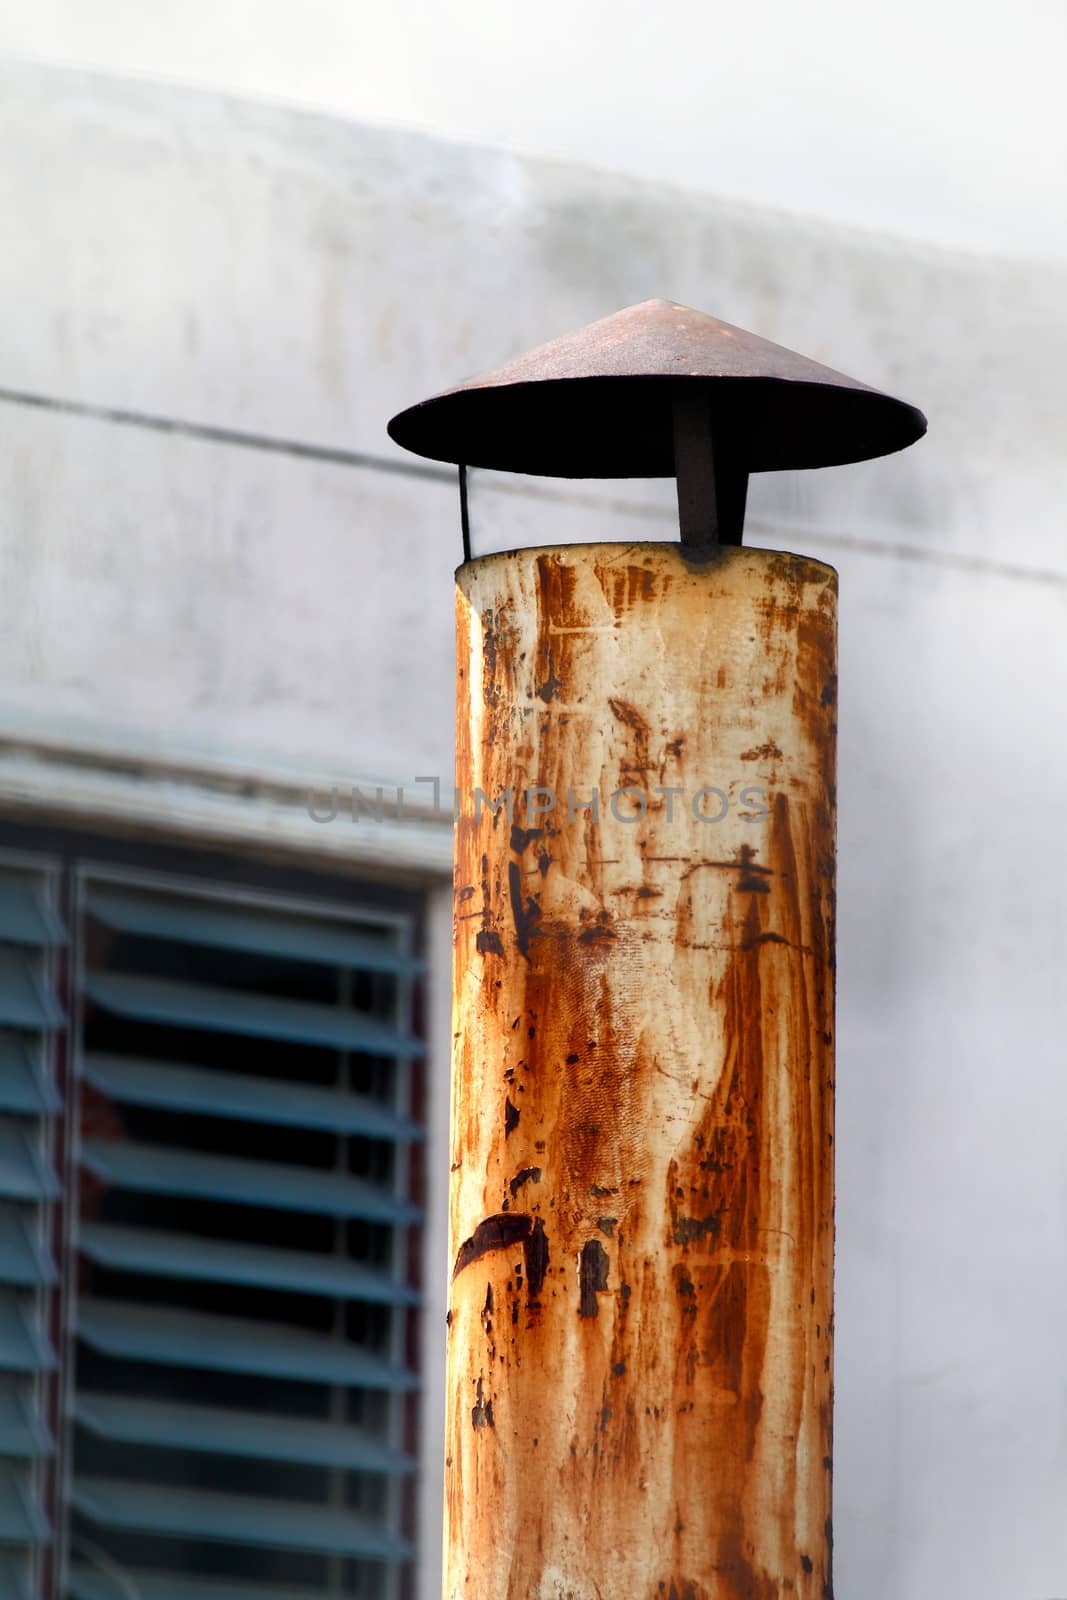 Smokestack steel on Industrial roof or home, Pollution smokestack small flue chimney with Smoke pollution by cgdeaw